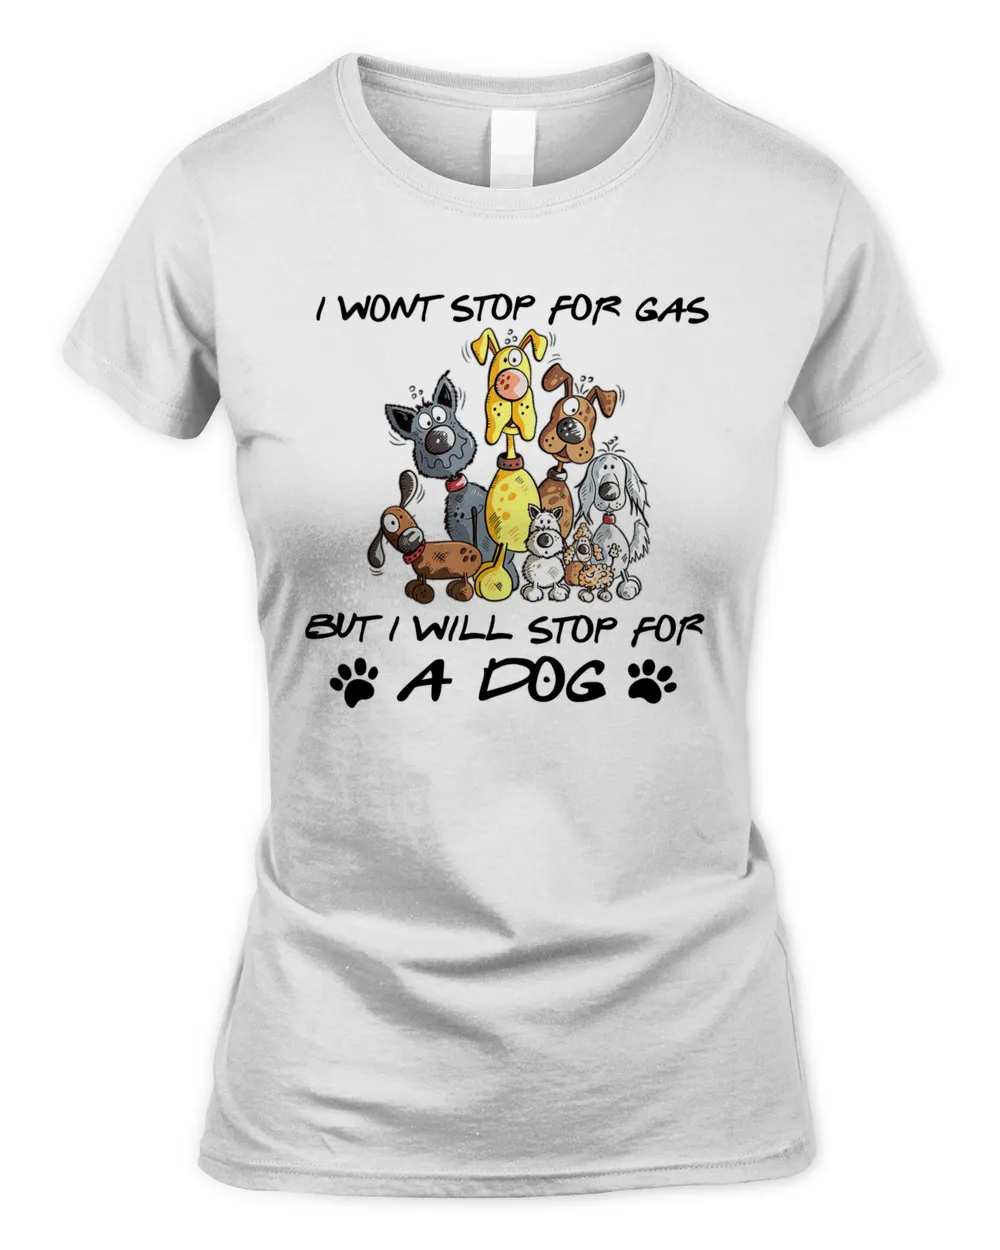 I wont stop for gas but I will stop for a dog